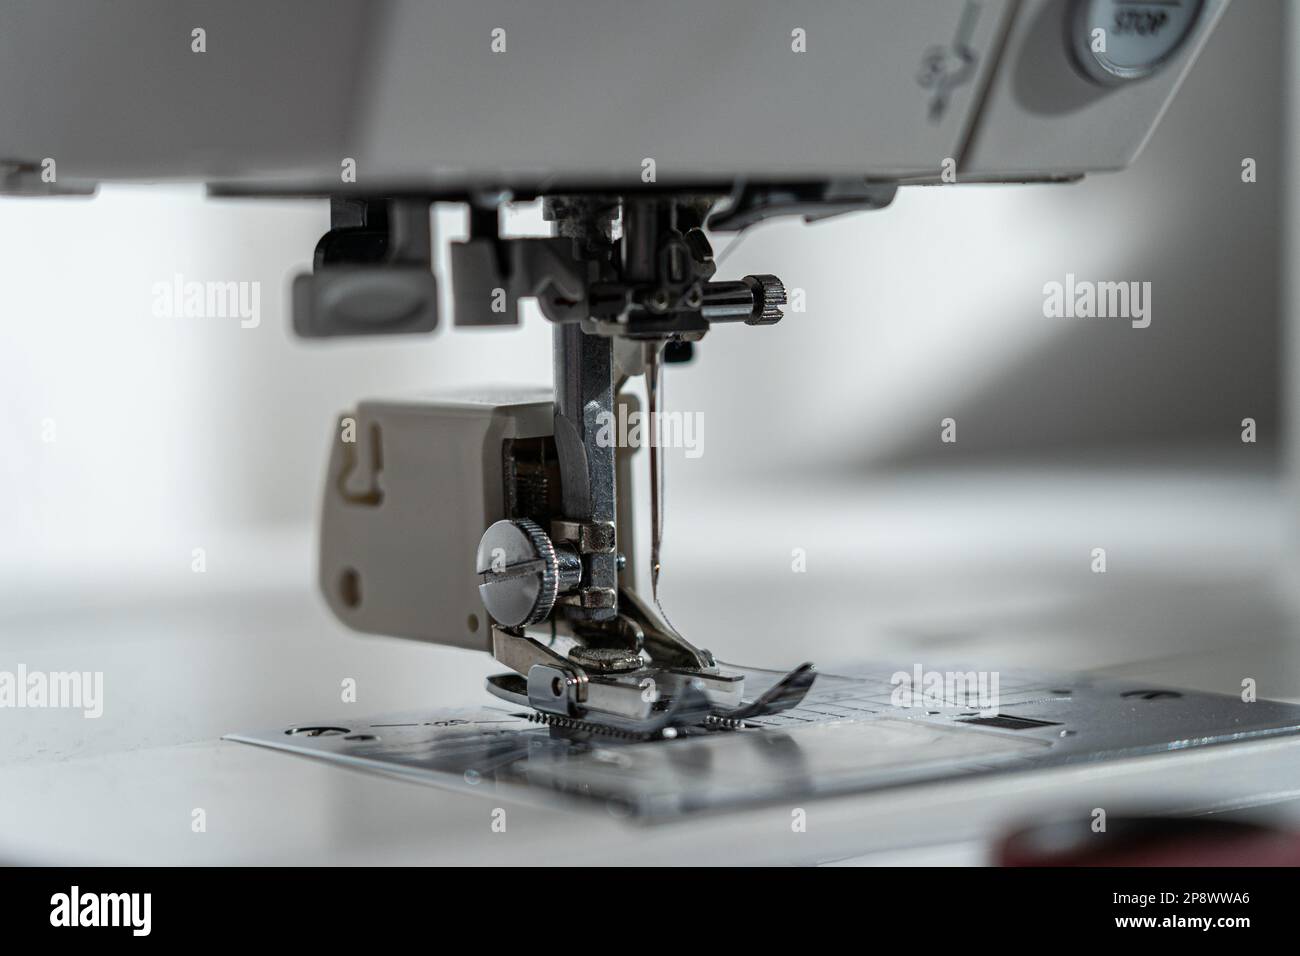 Needle of a sewing machine and part around it Stock Photo